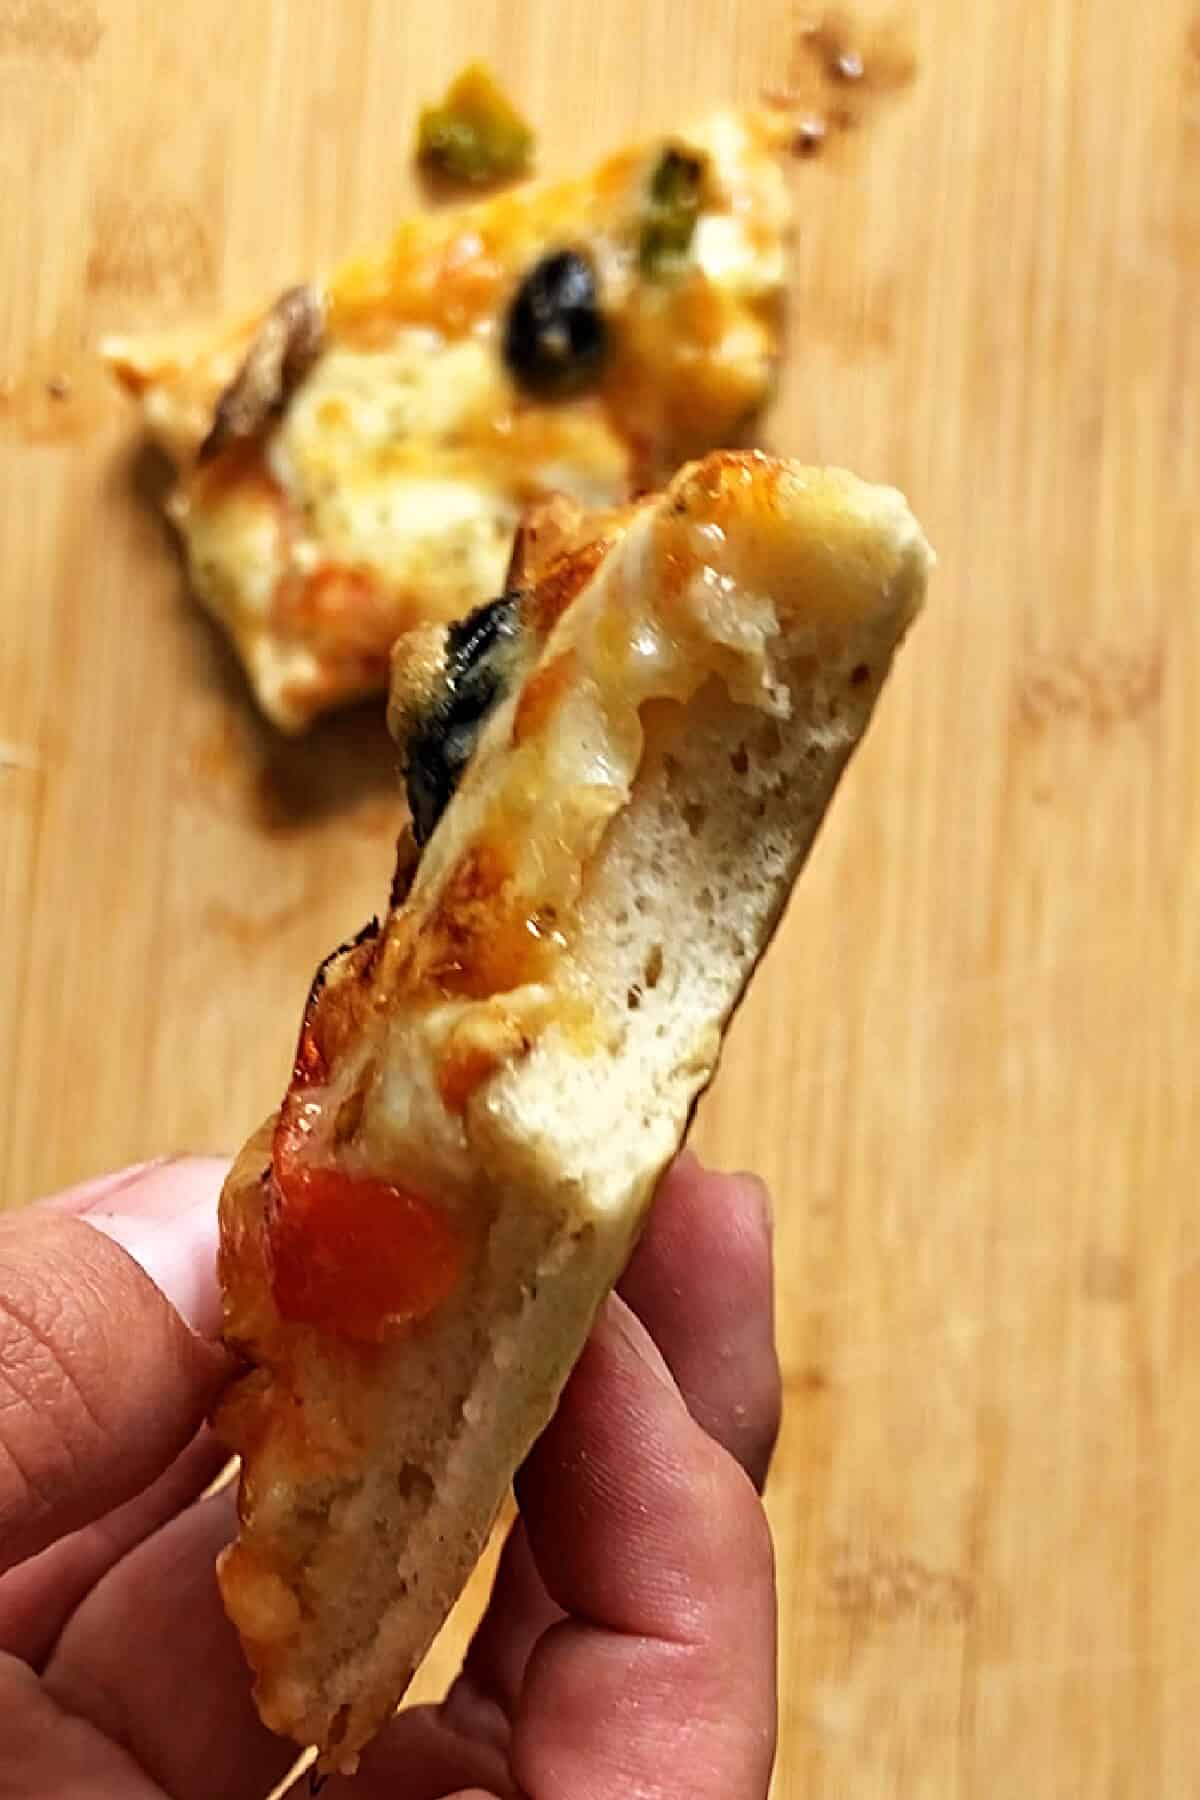 A slice of pizza to show how well it's cooked.